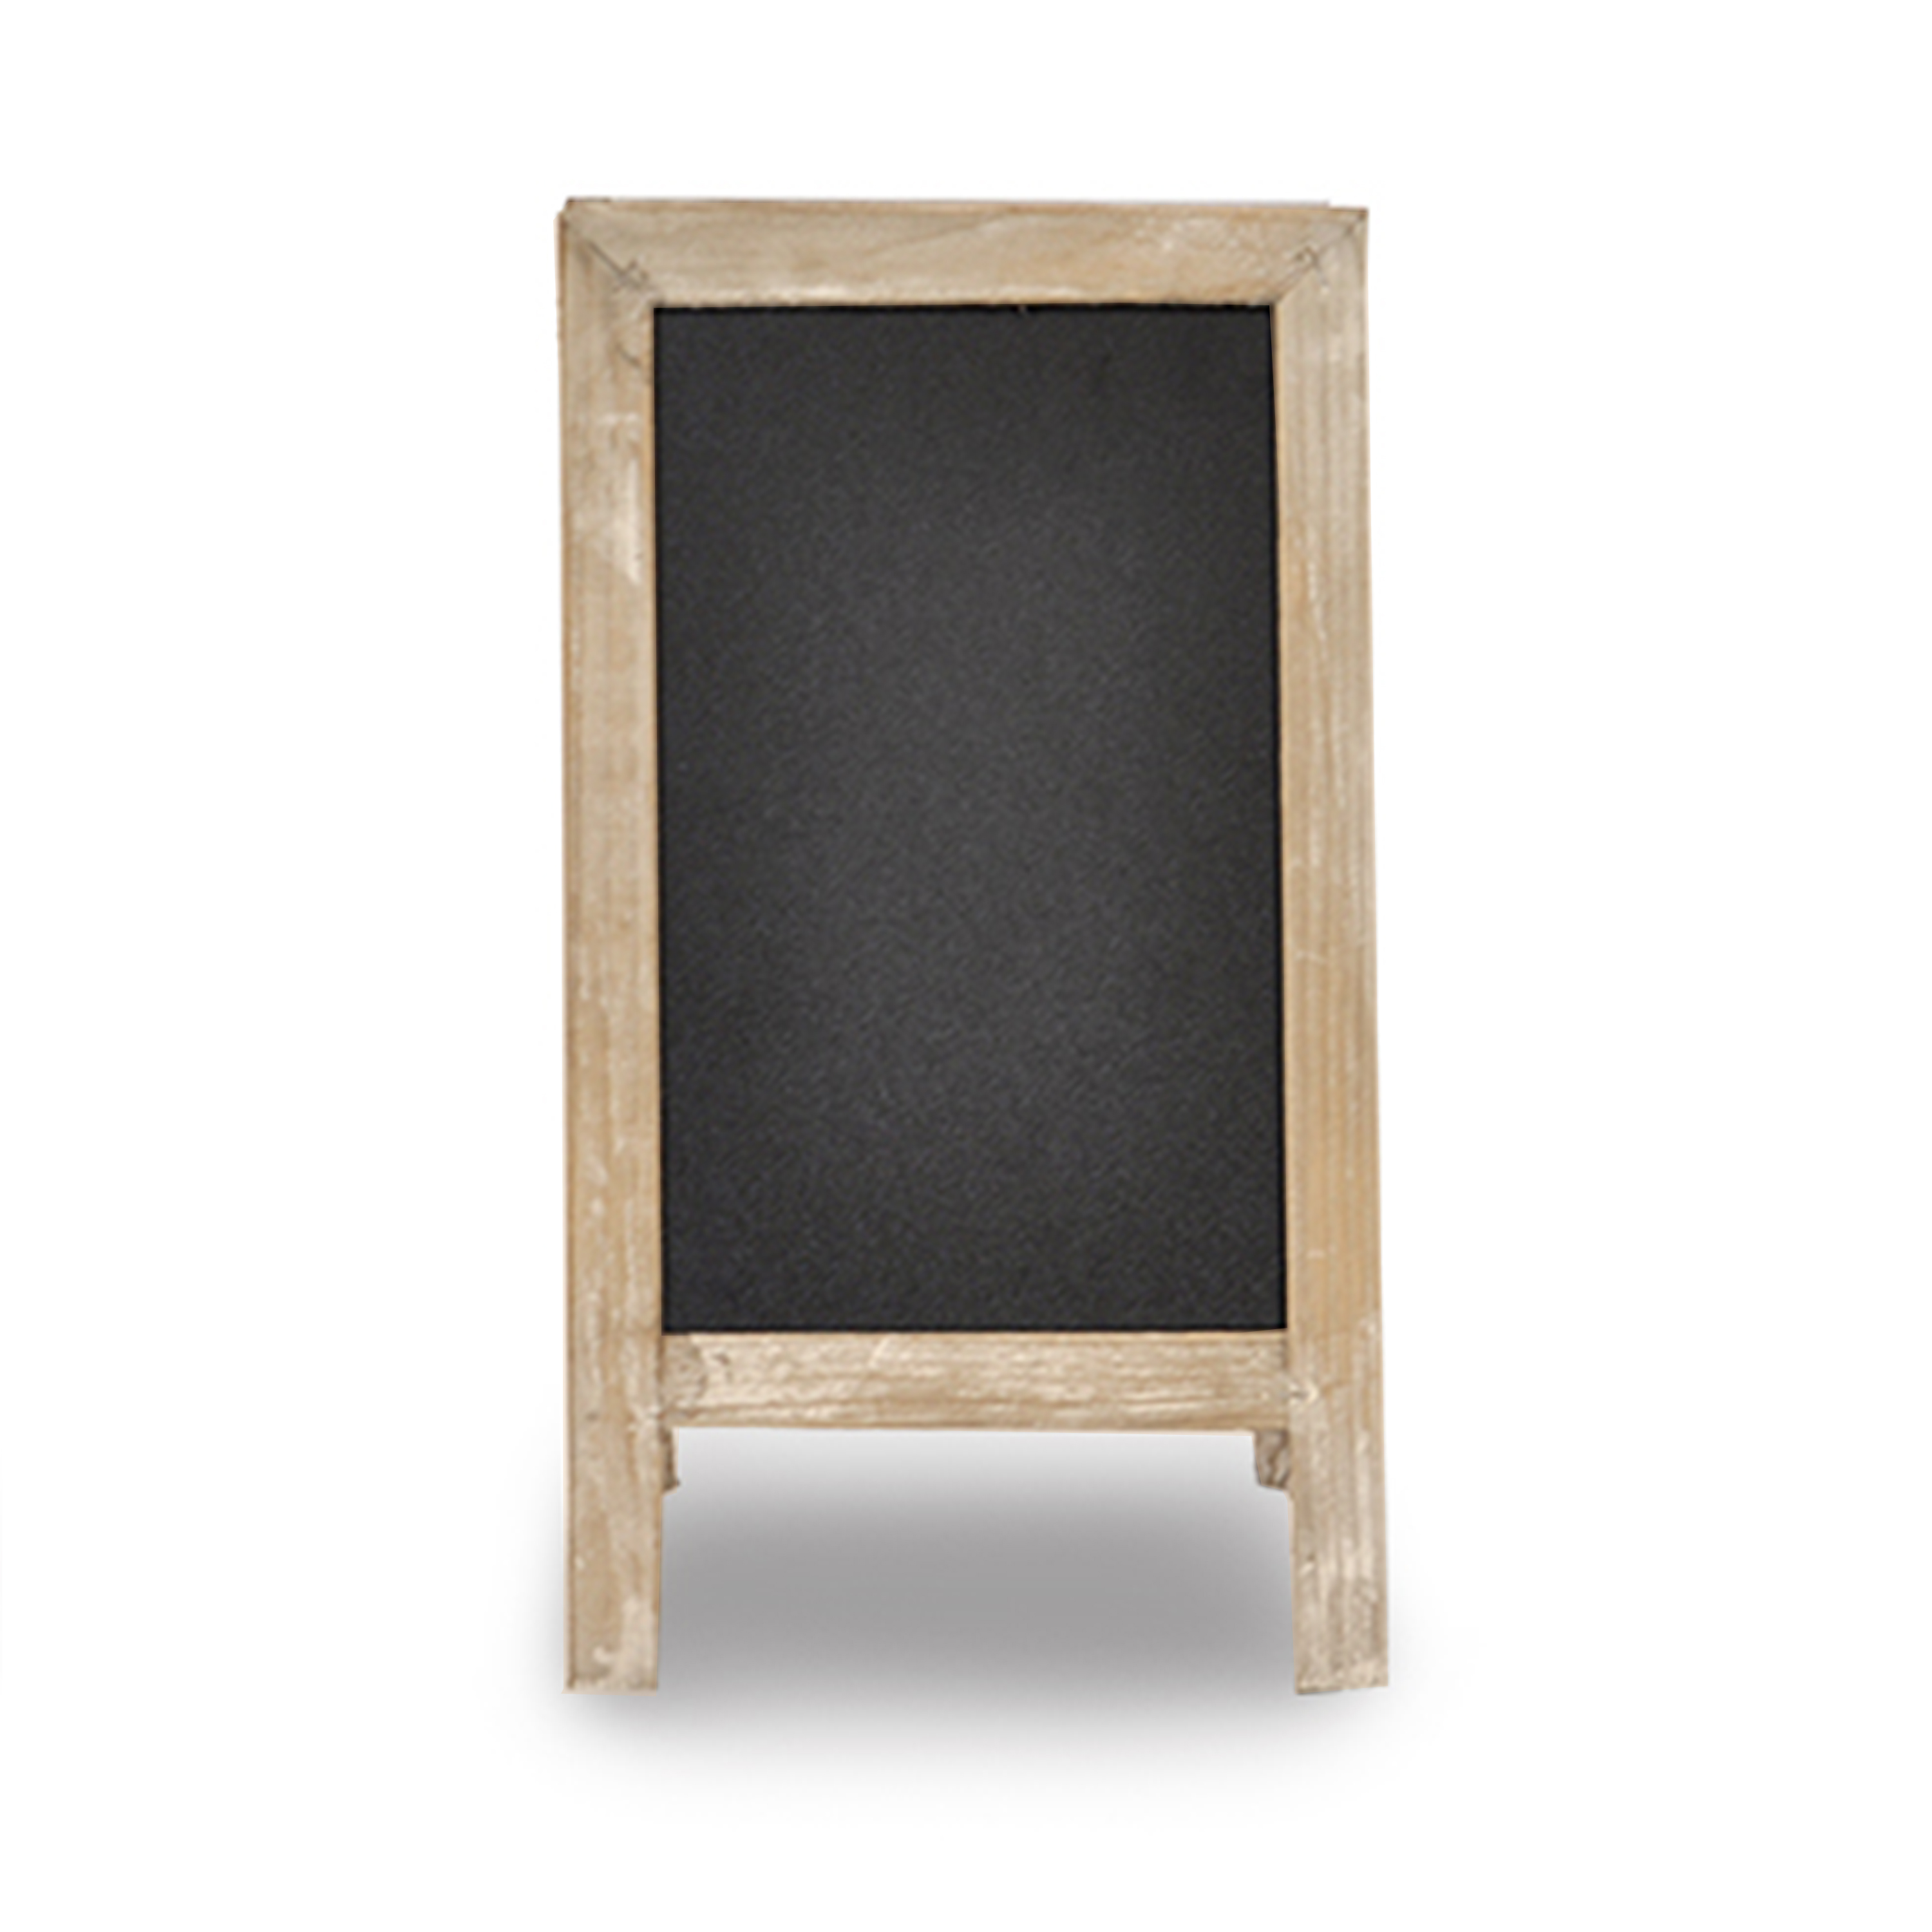 The Lucky Clover Trading Table Top Decorative Chalkboard Display, Smokey Gray